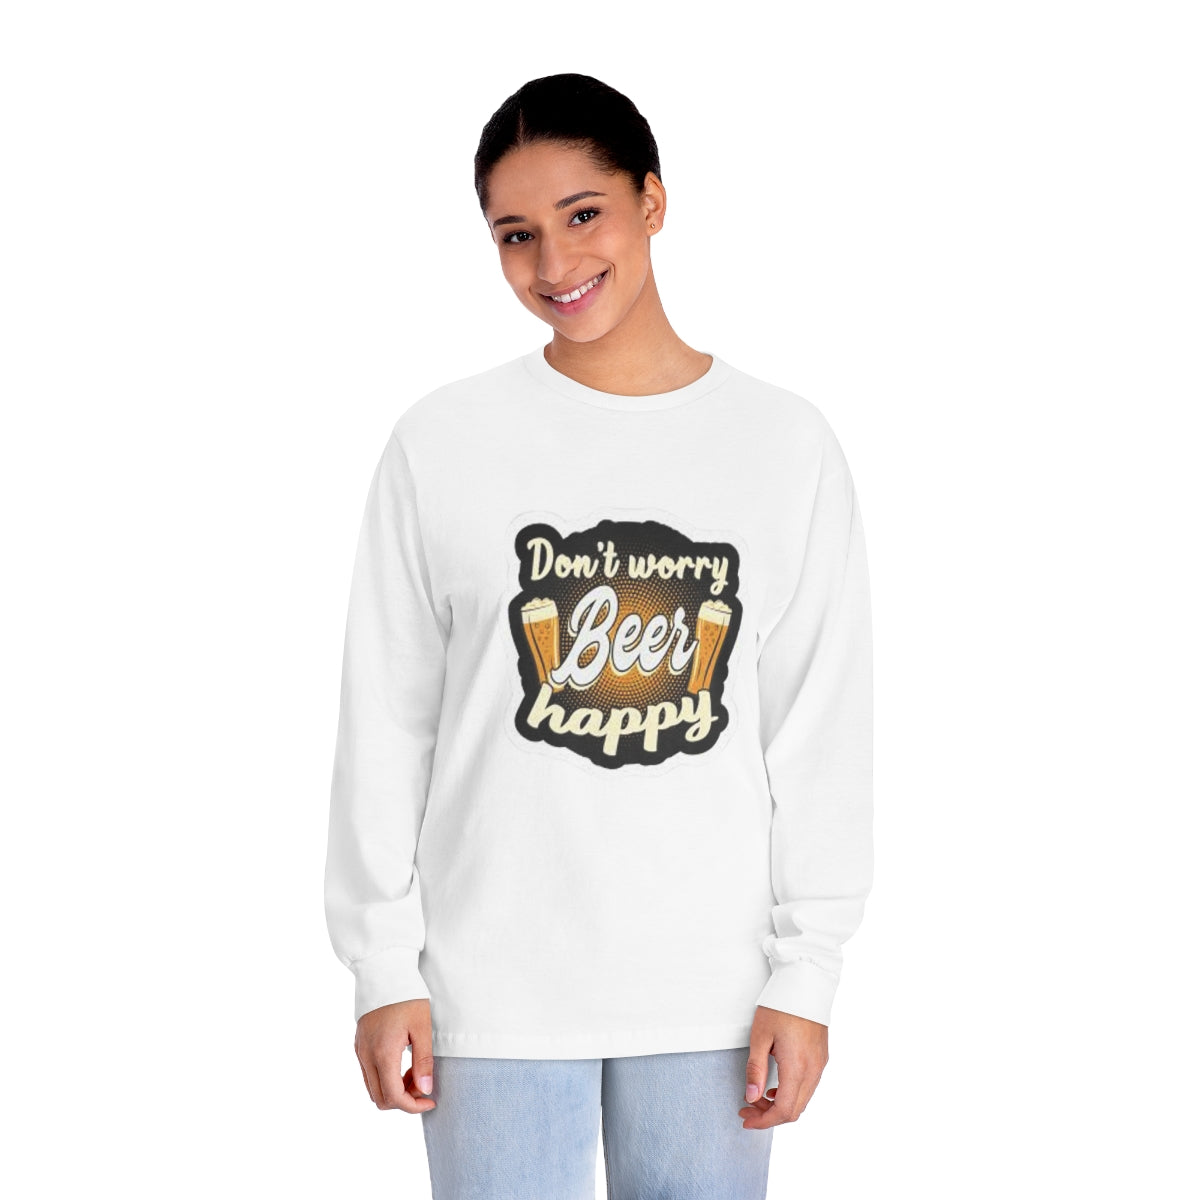 Don’t worry beer happy. Unisex Classic Long Sleeve T-Shirt